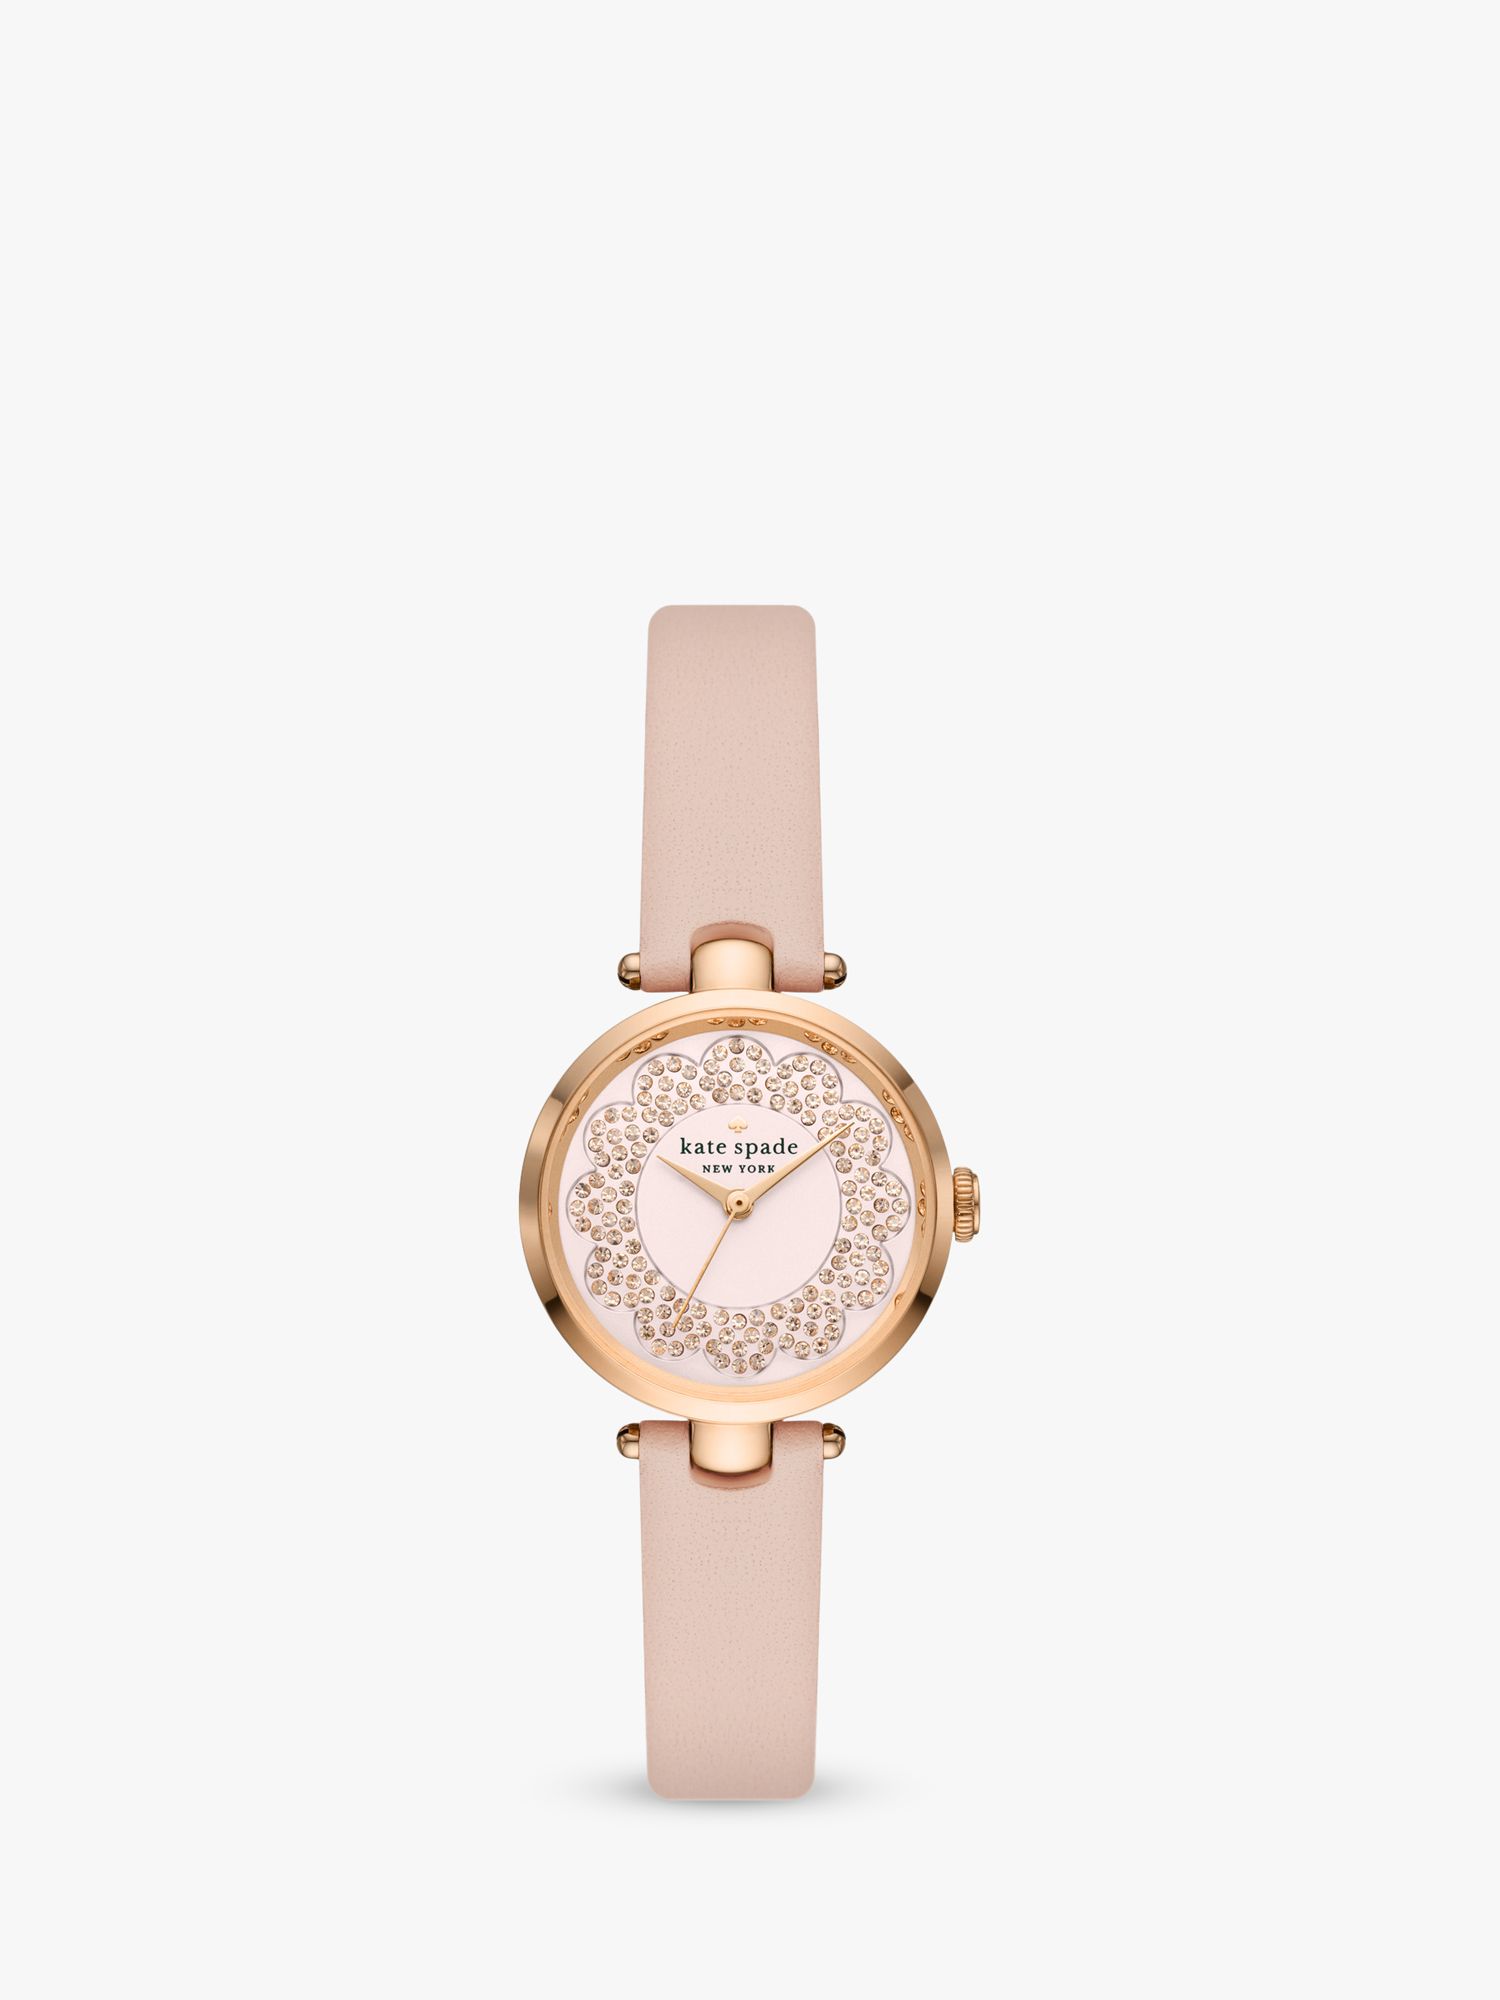 kate spade new york KSW1740 Women's Holland Crystal Leather Strap Watch ...